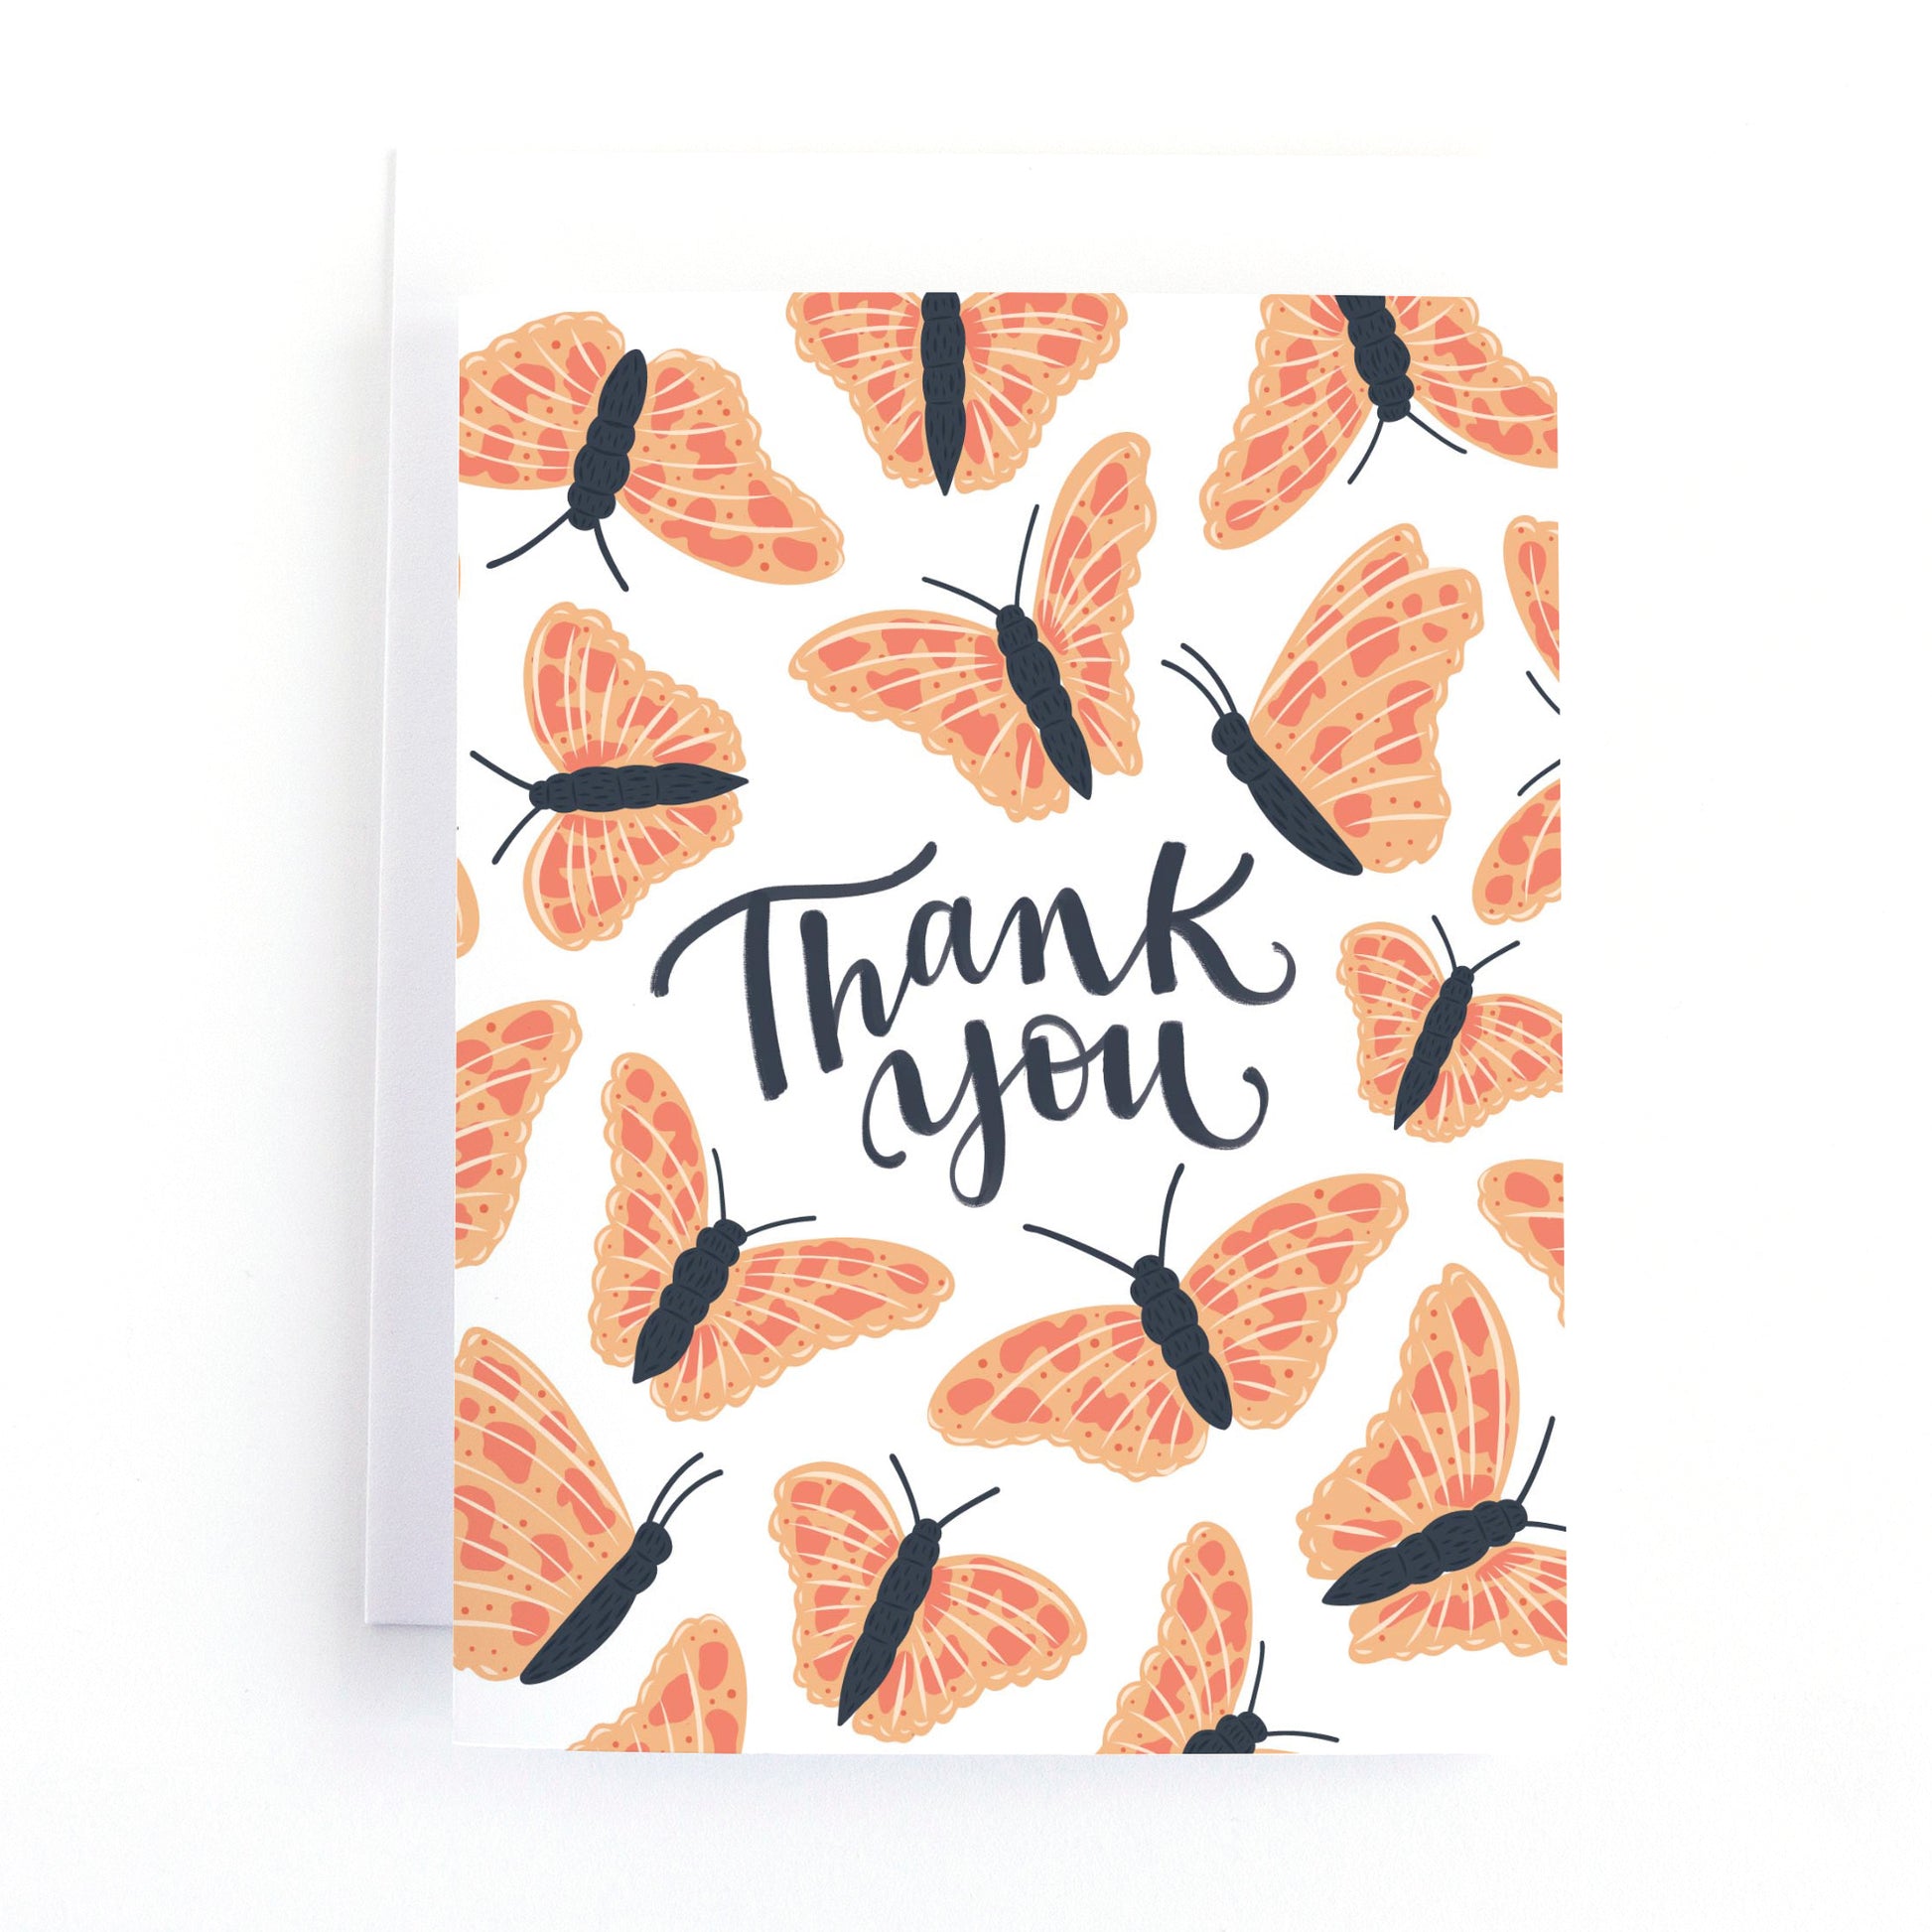 Thank you card with pink and coral butterflies fluttering around the hand lettered message, Thank you on a white background.